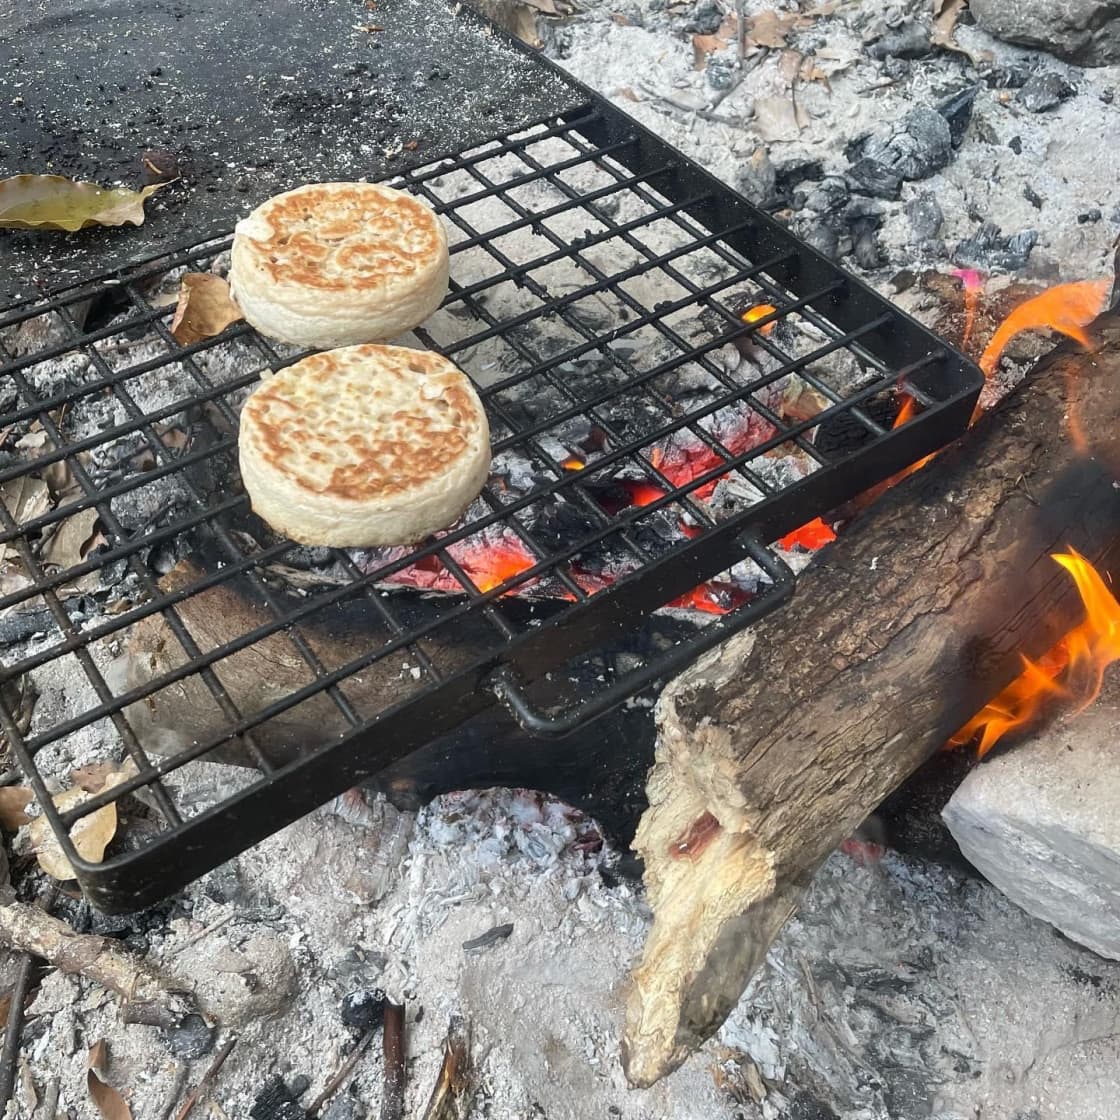 Who doesn’t love a sourdough crumpet cooked over the campfire? 
Locally made by crumpet expert Tim Sherwin. 
Check out Sourdough Crumpet Co. 